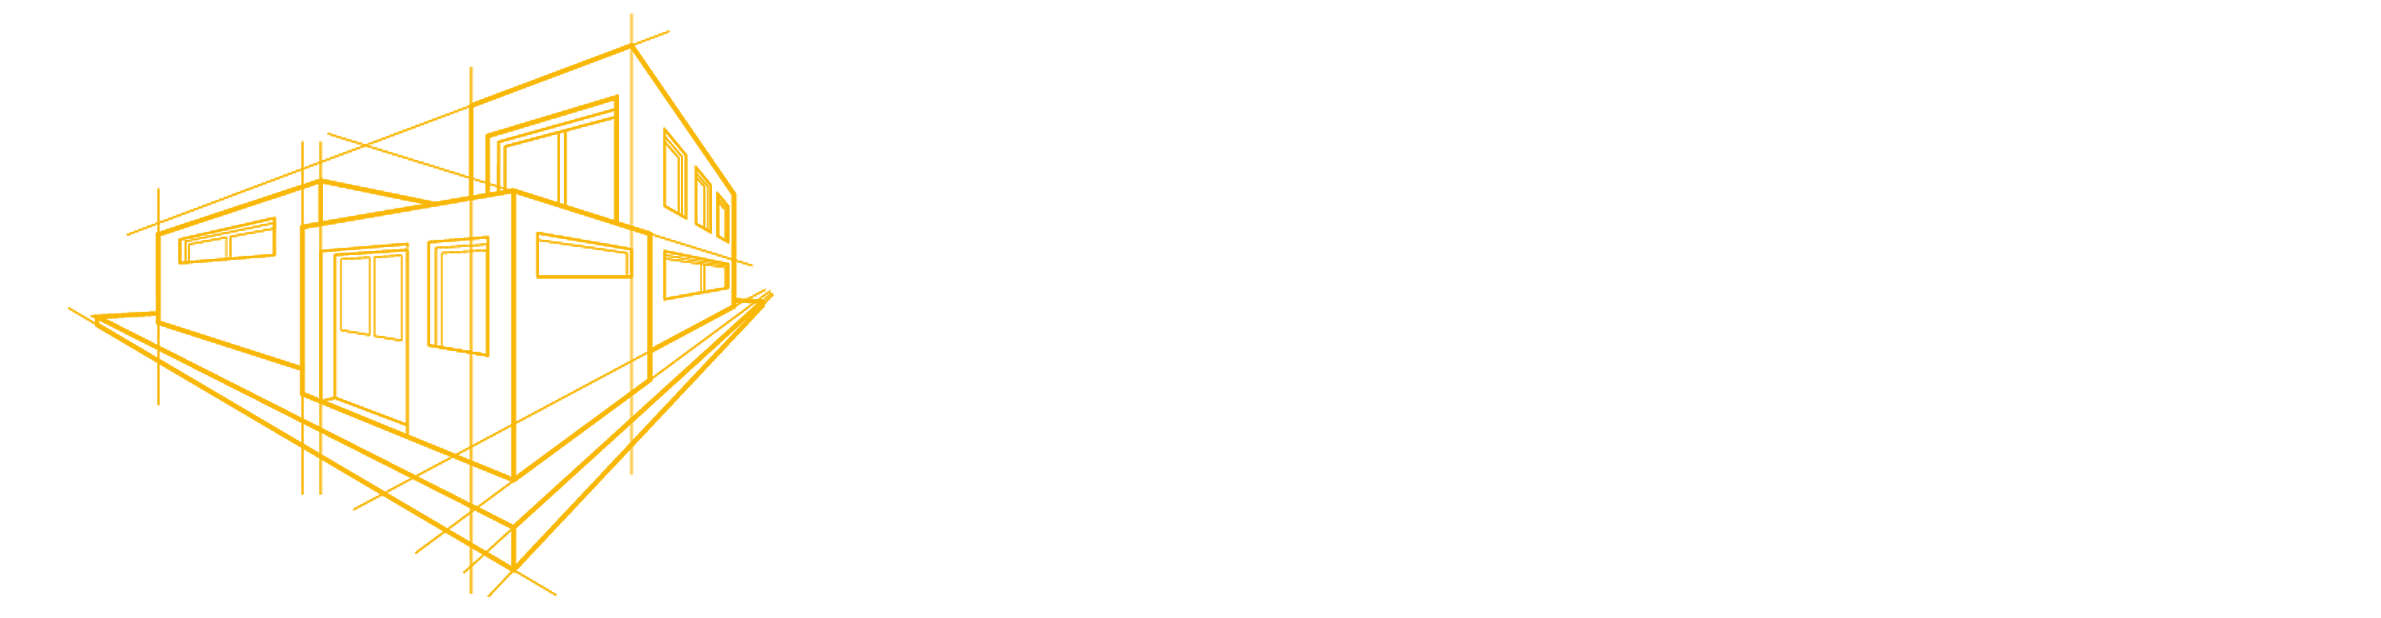 The Smart Investment Group